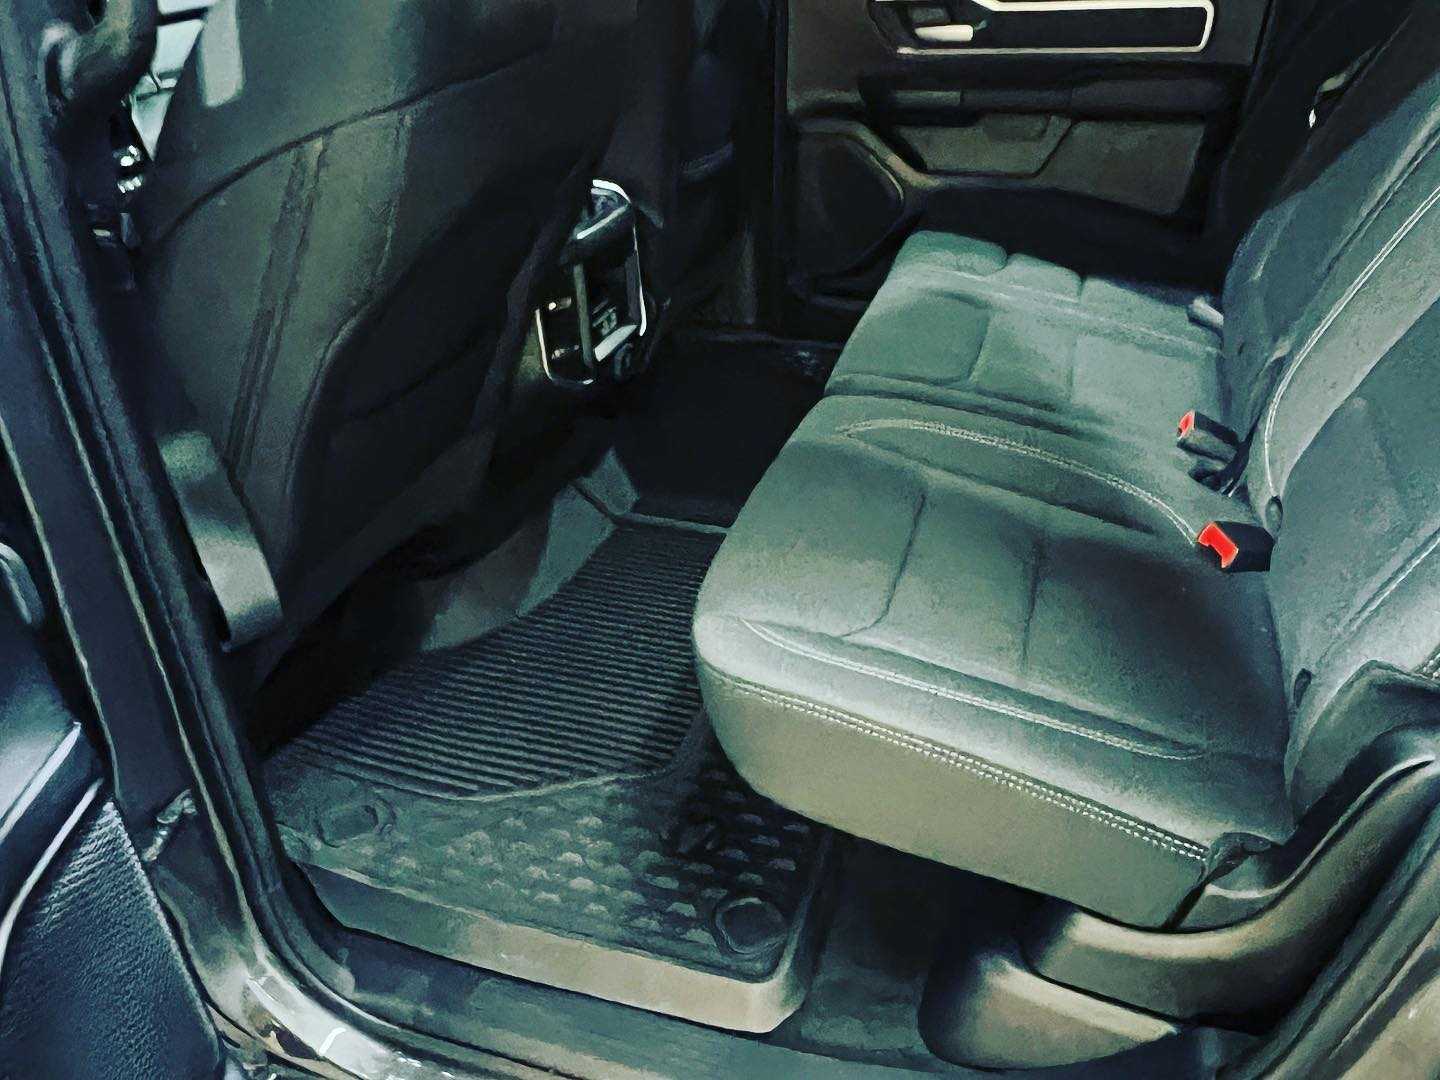 Interior of a Ram truck that has been cleaned by us